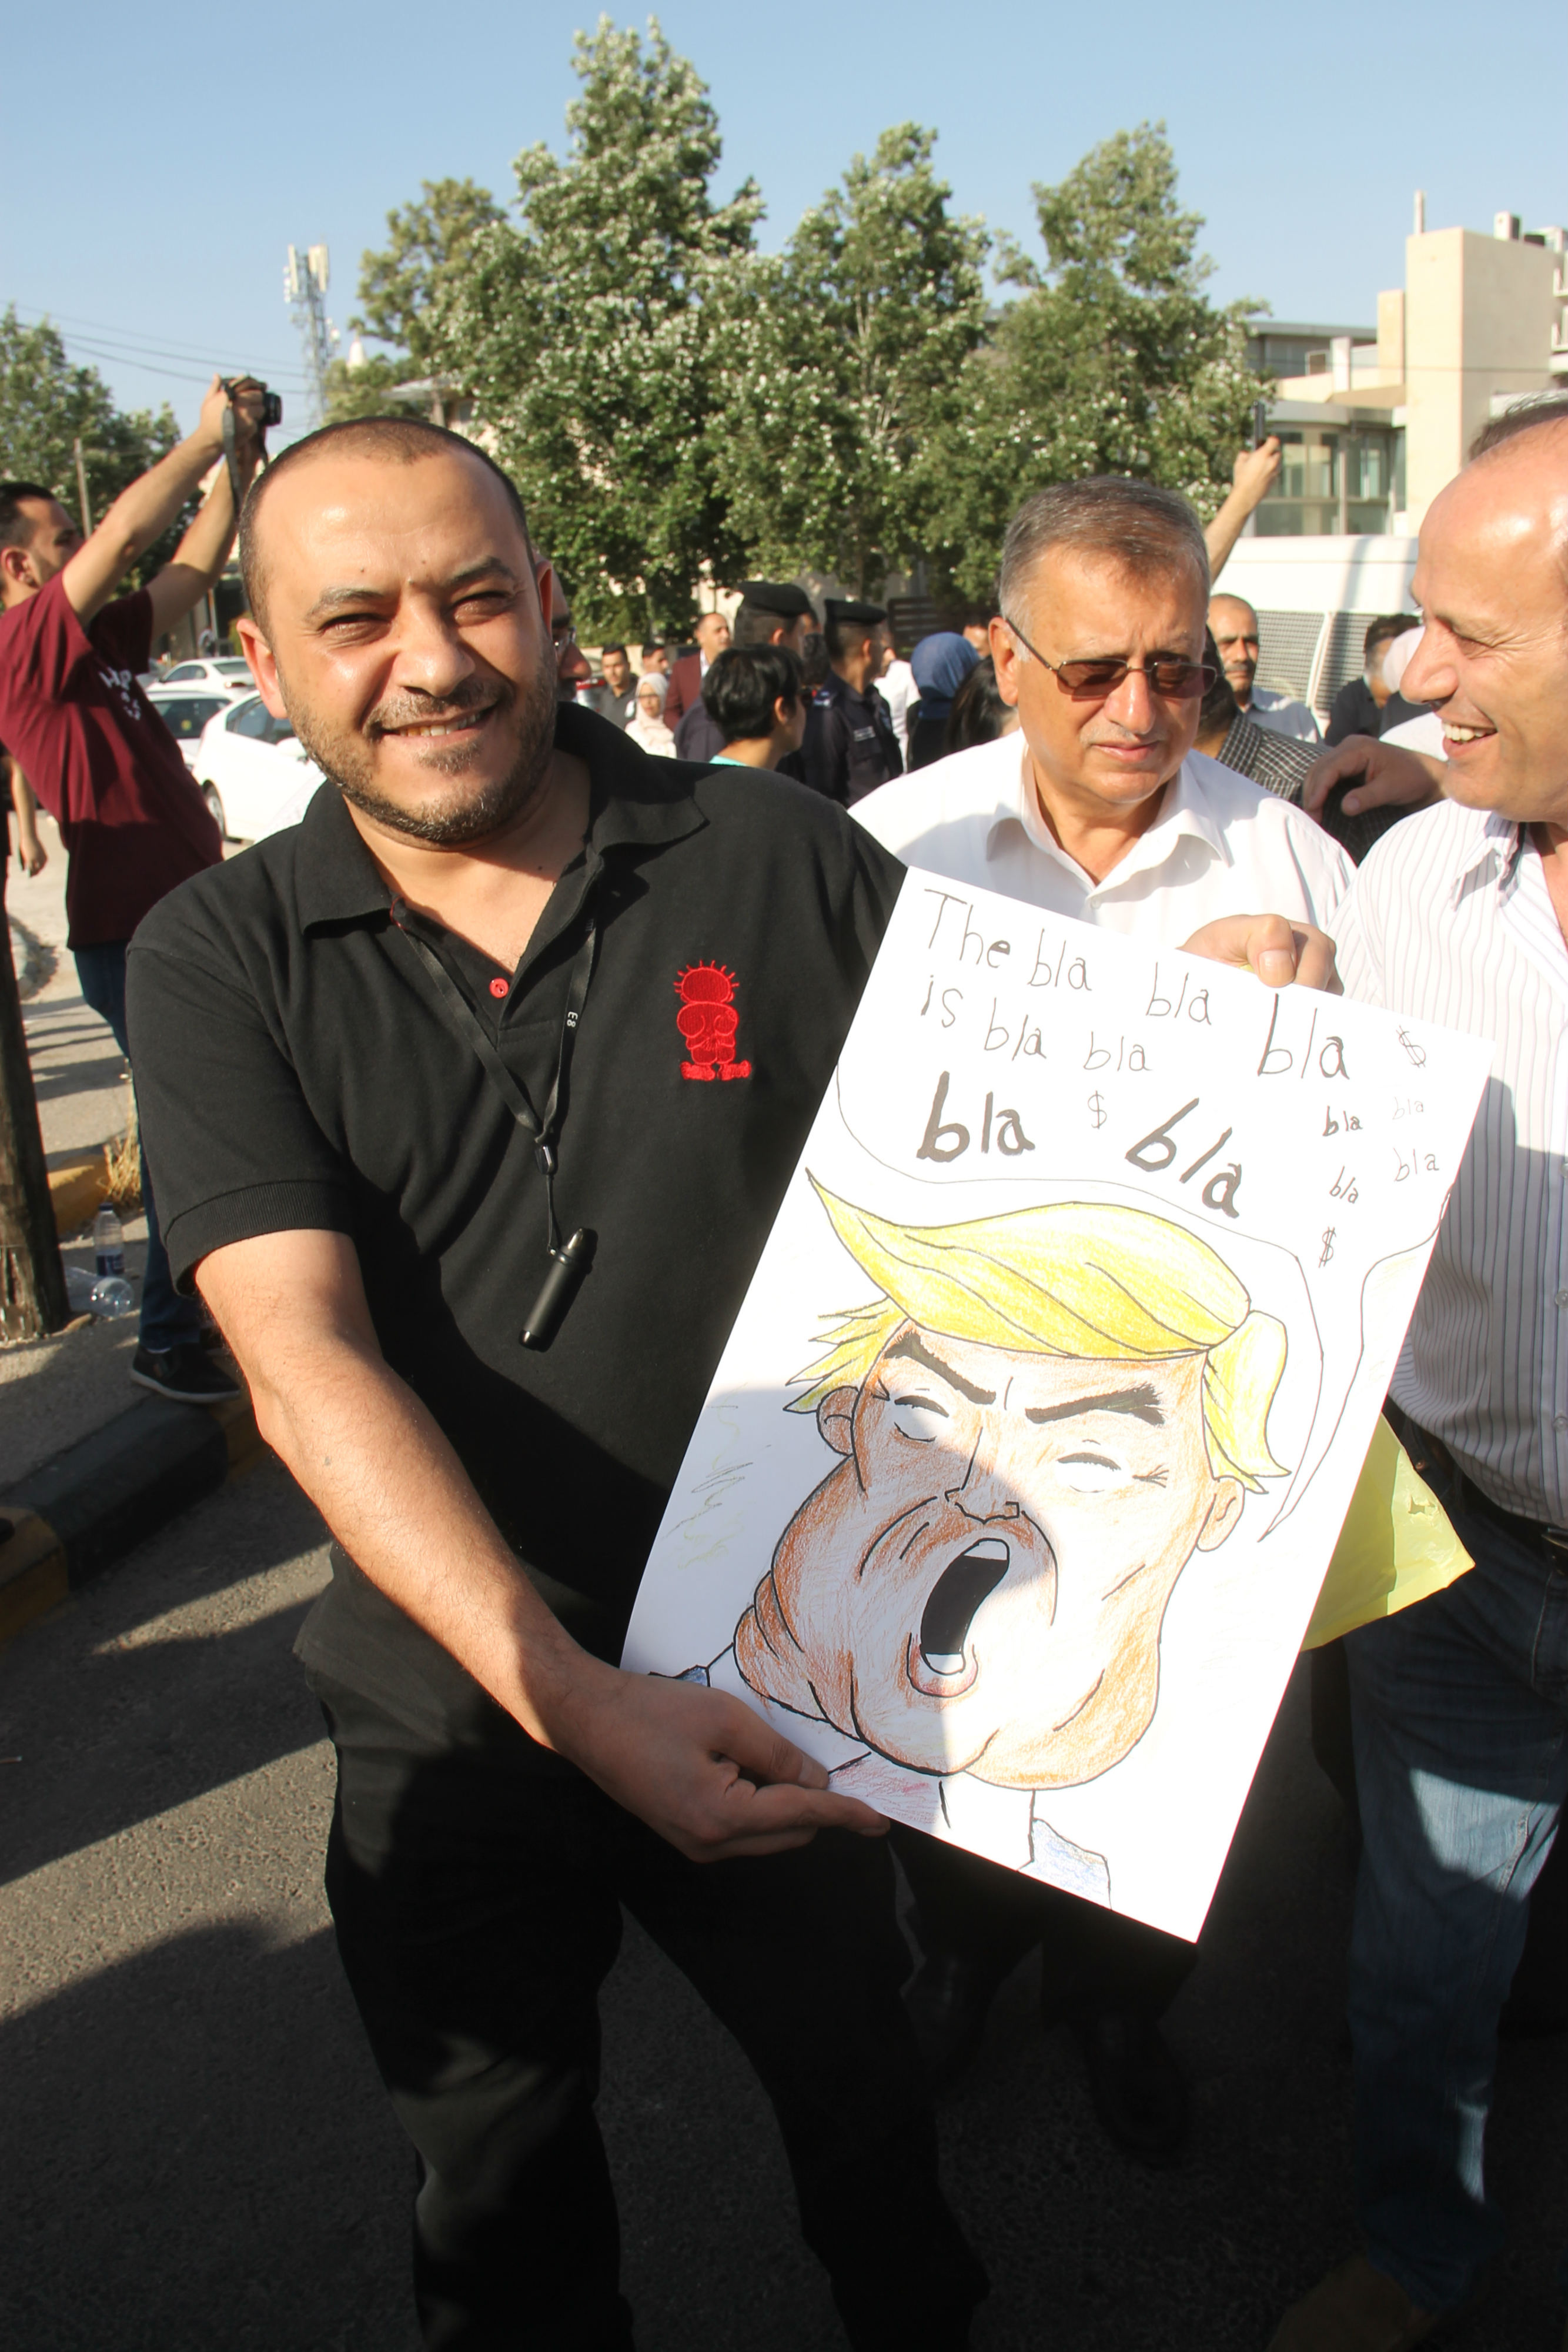 A protester holds an image of Donald Trump at a rally against his "deal of the century" in Amman (MEE/Mohammed Ersan)